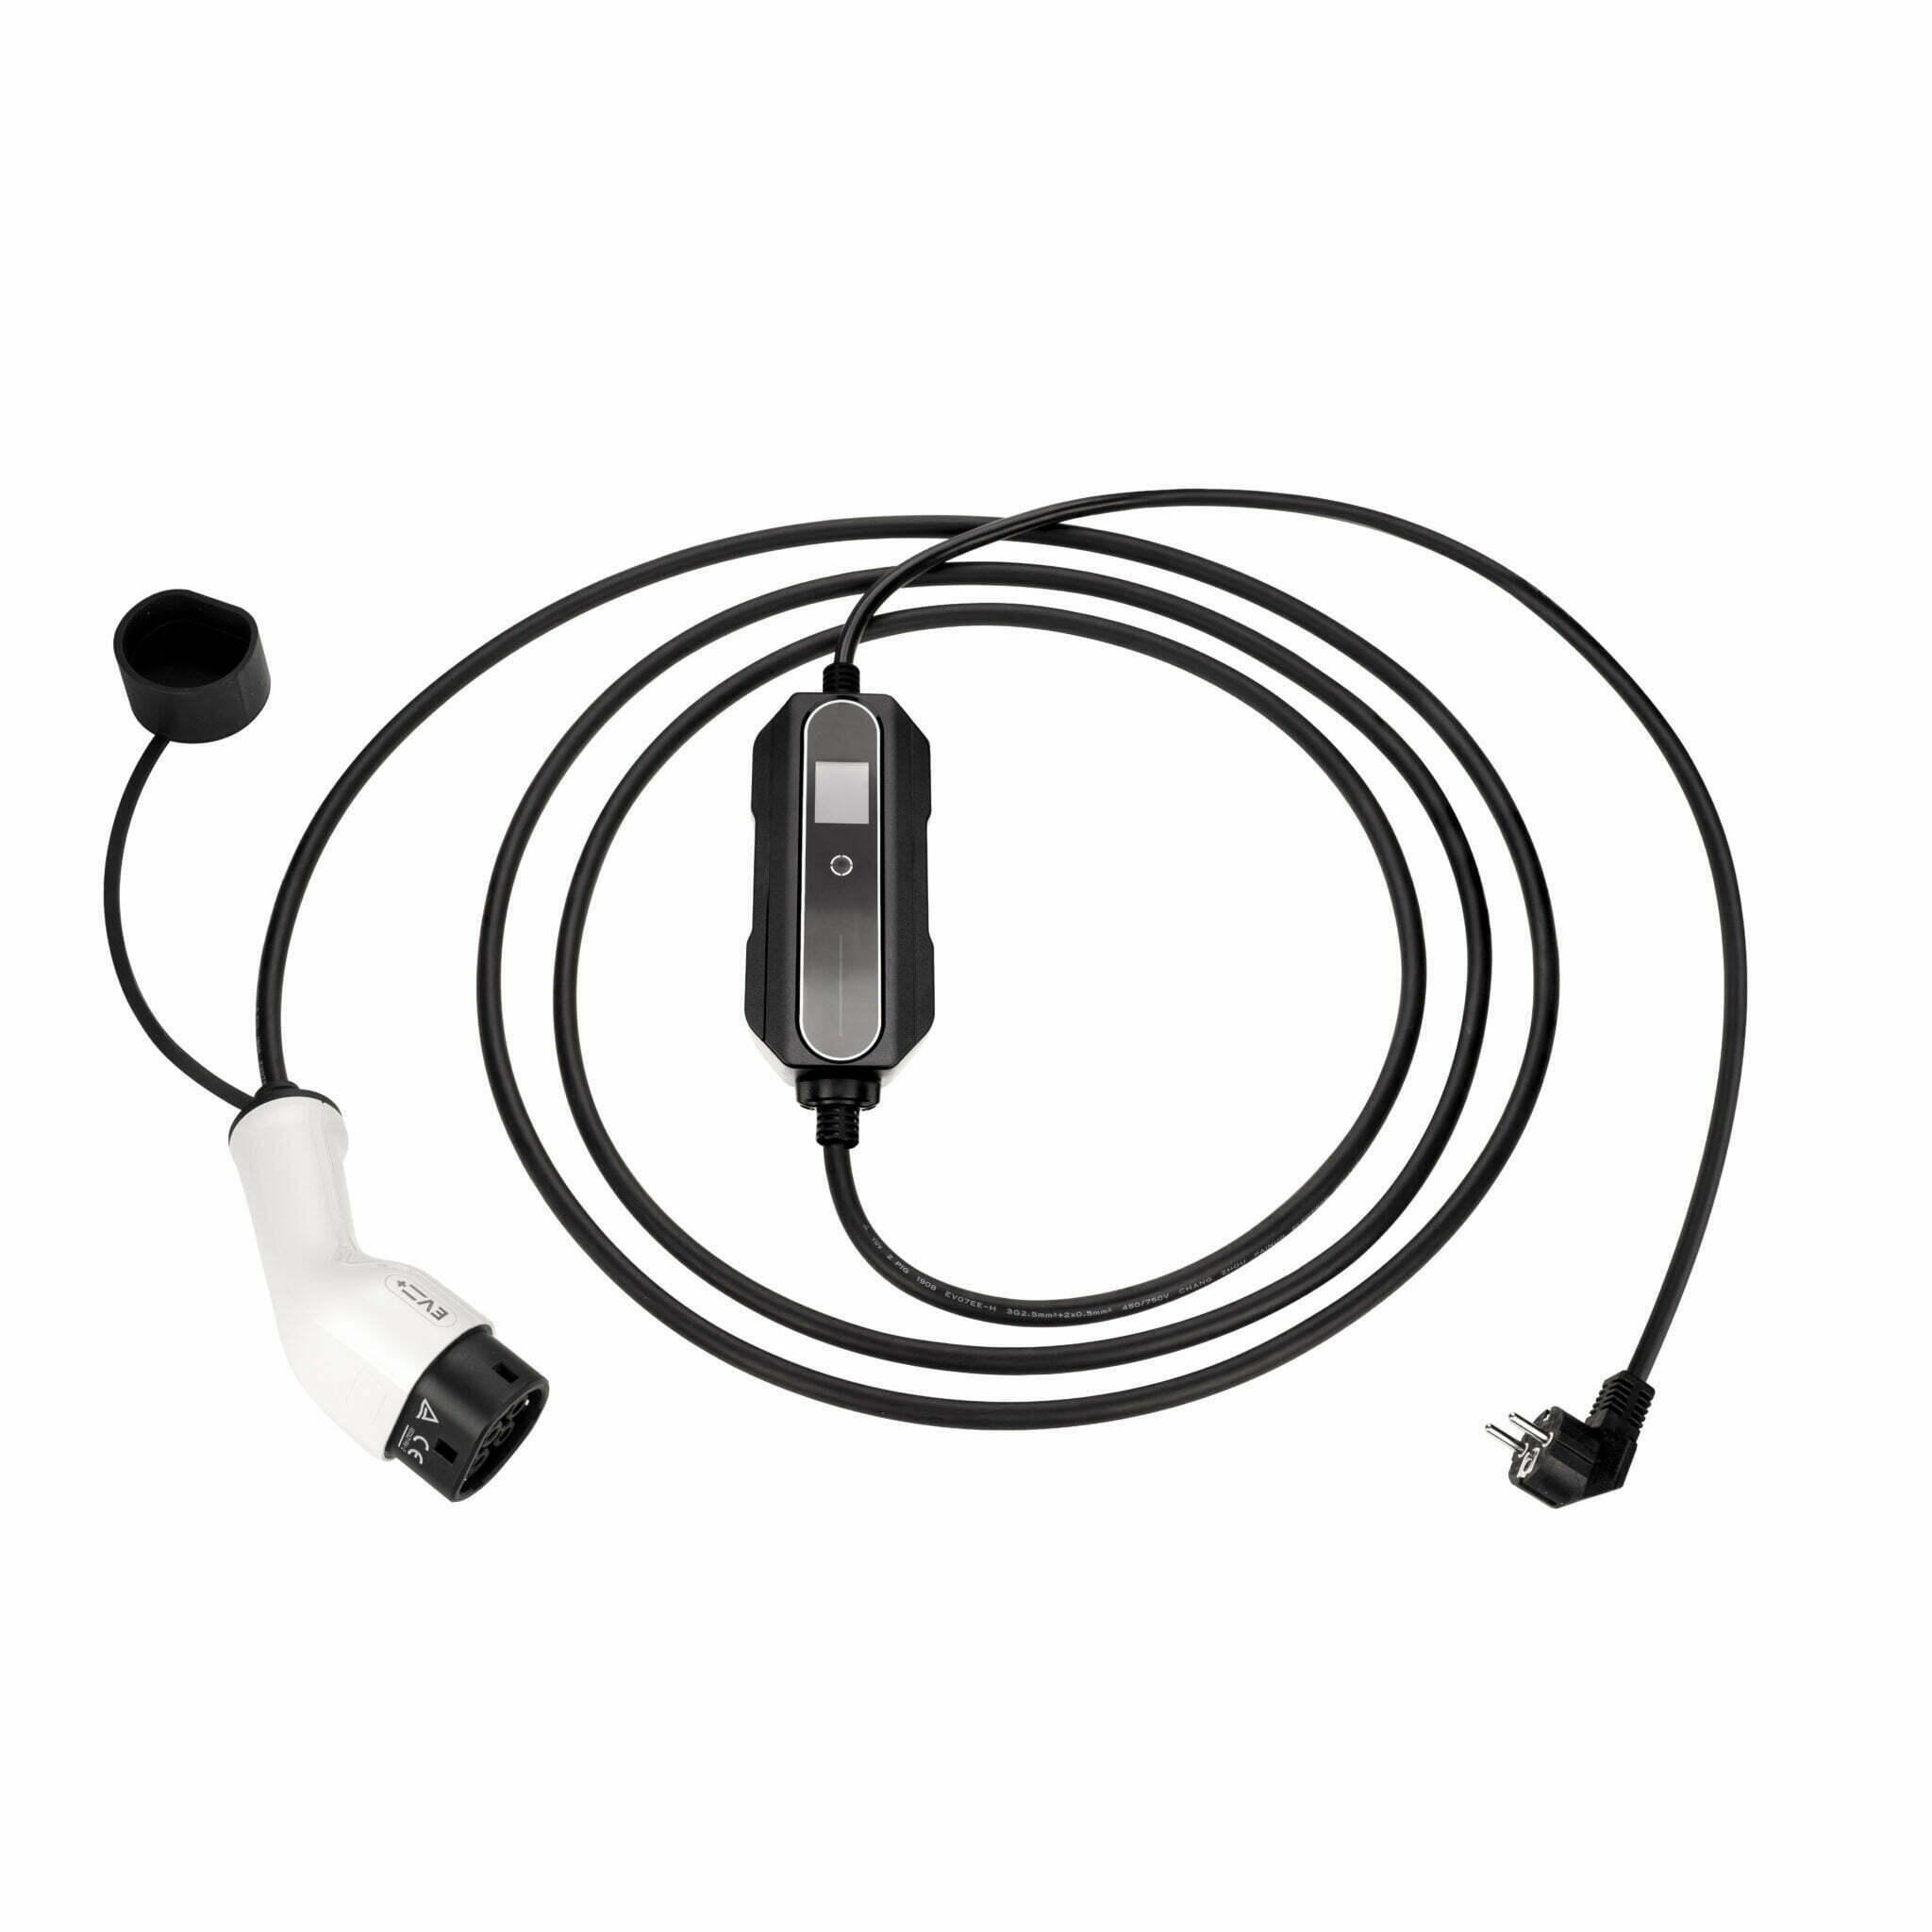 EV portable charging cable Type 2 to schuko